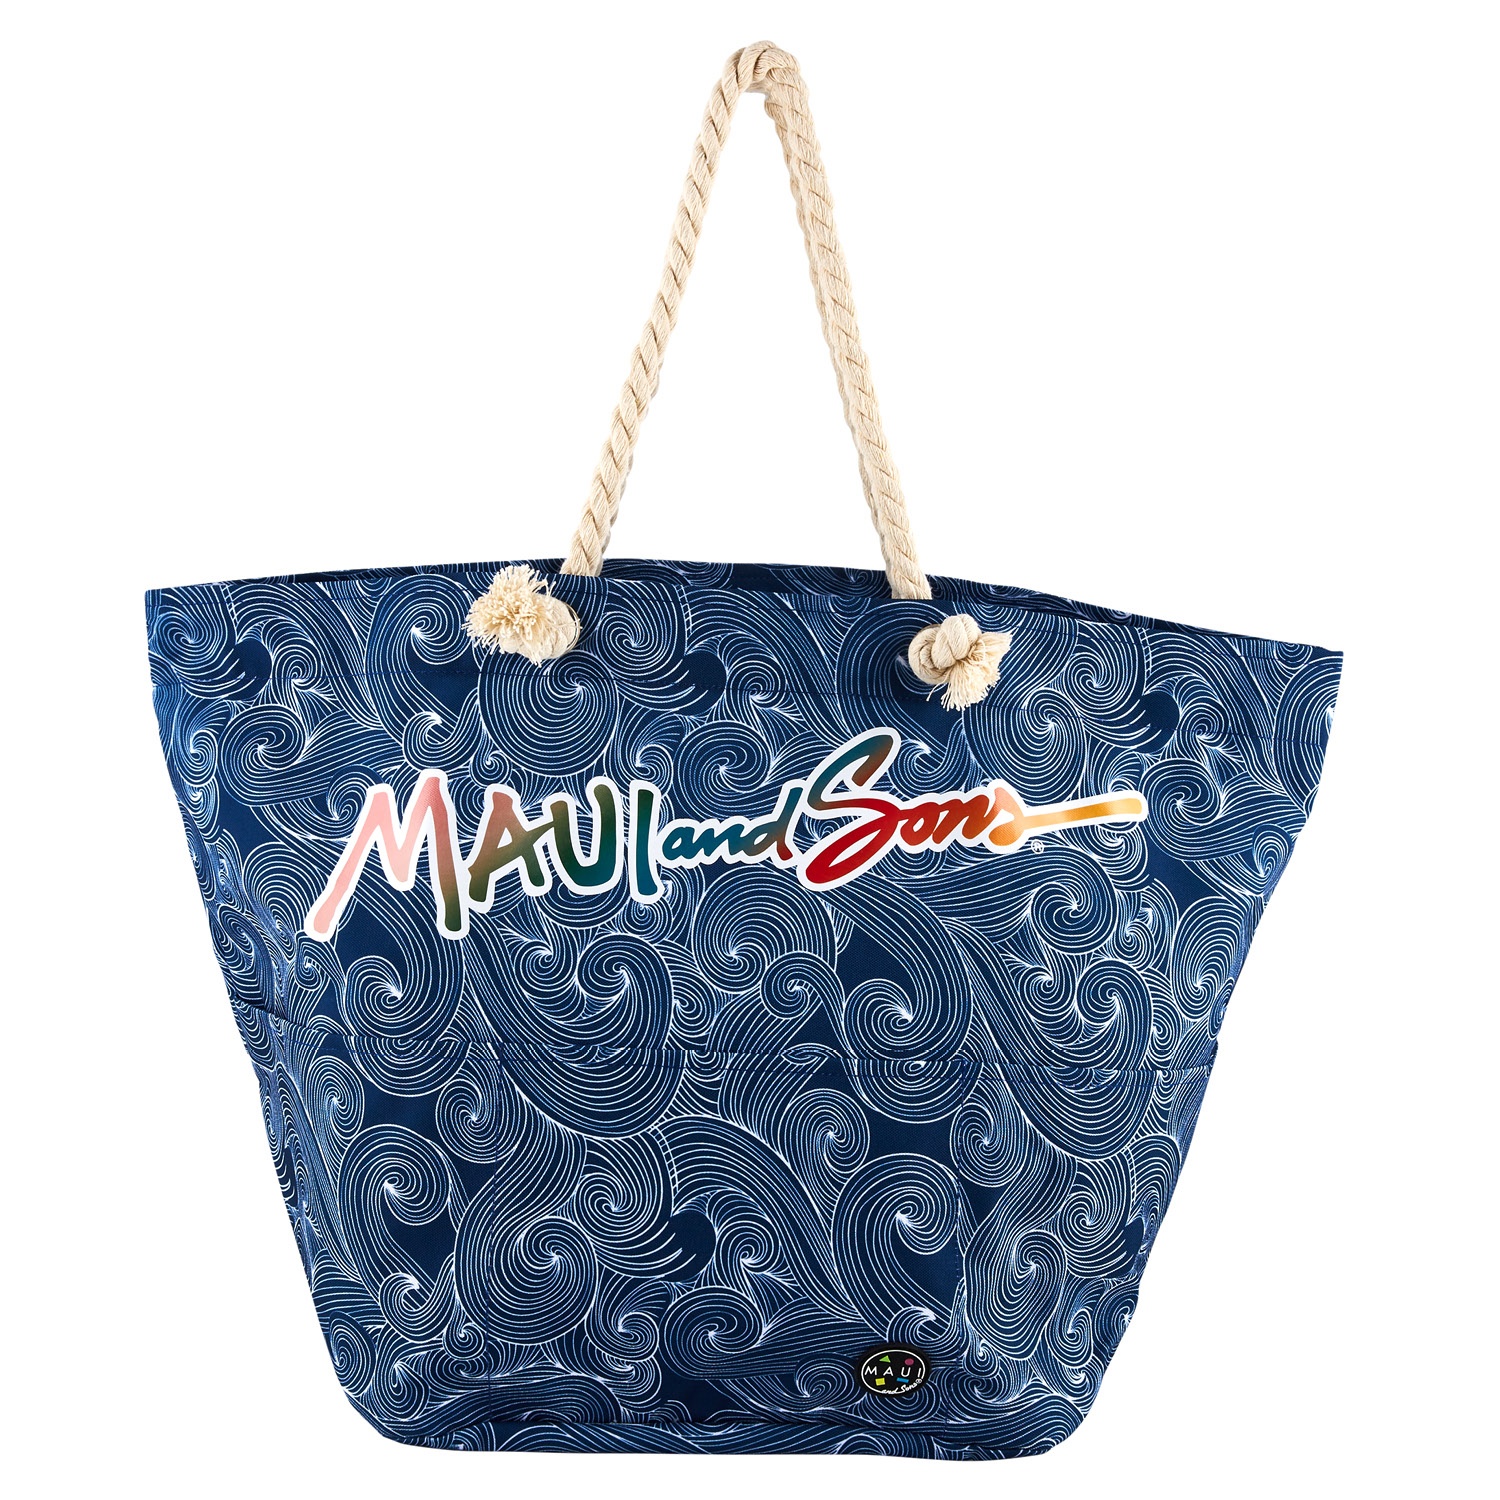 Maui and Sons® Strandtasche